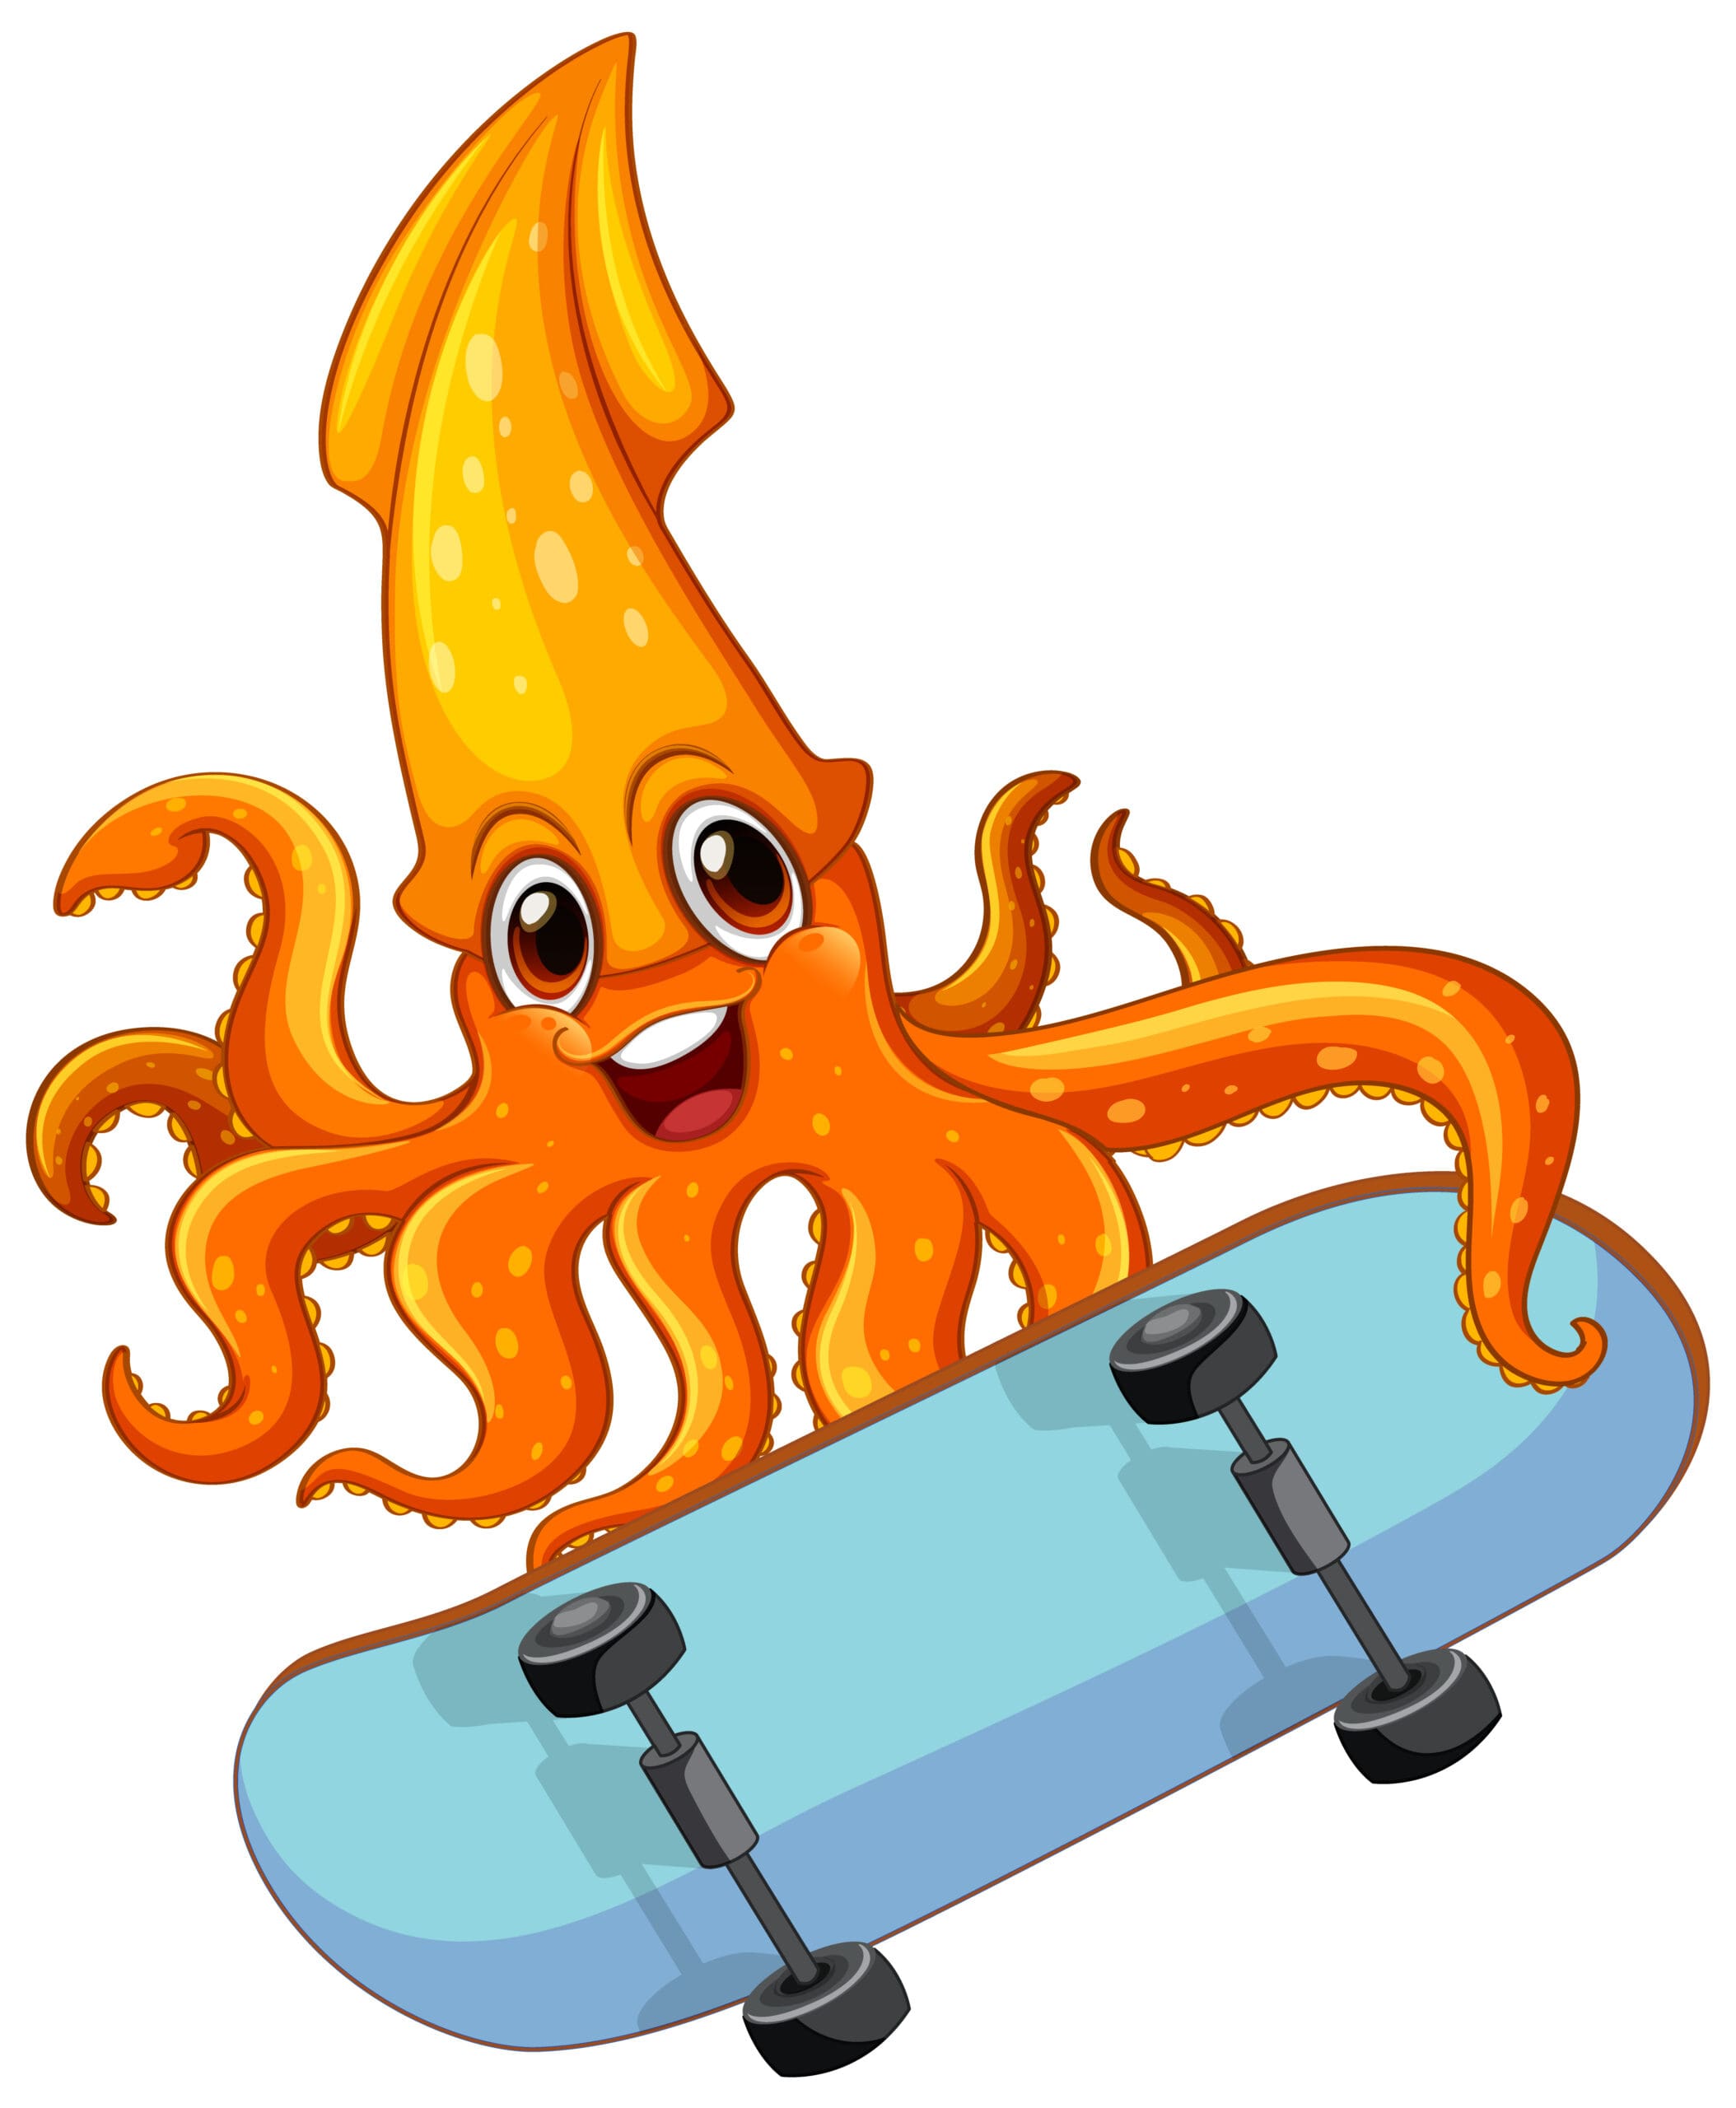 Cartoon graphic of a squid inking with joy.